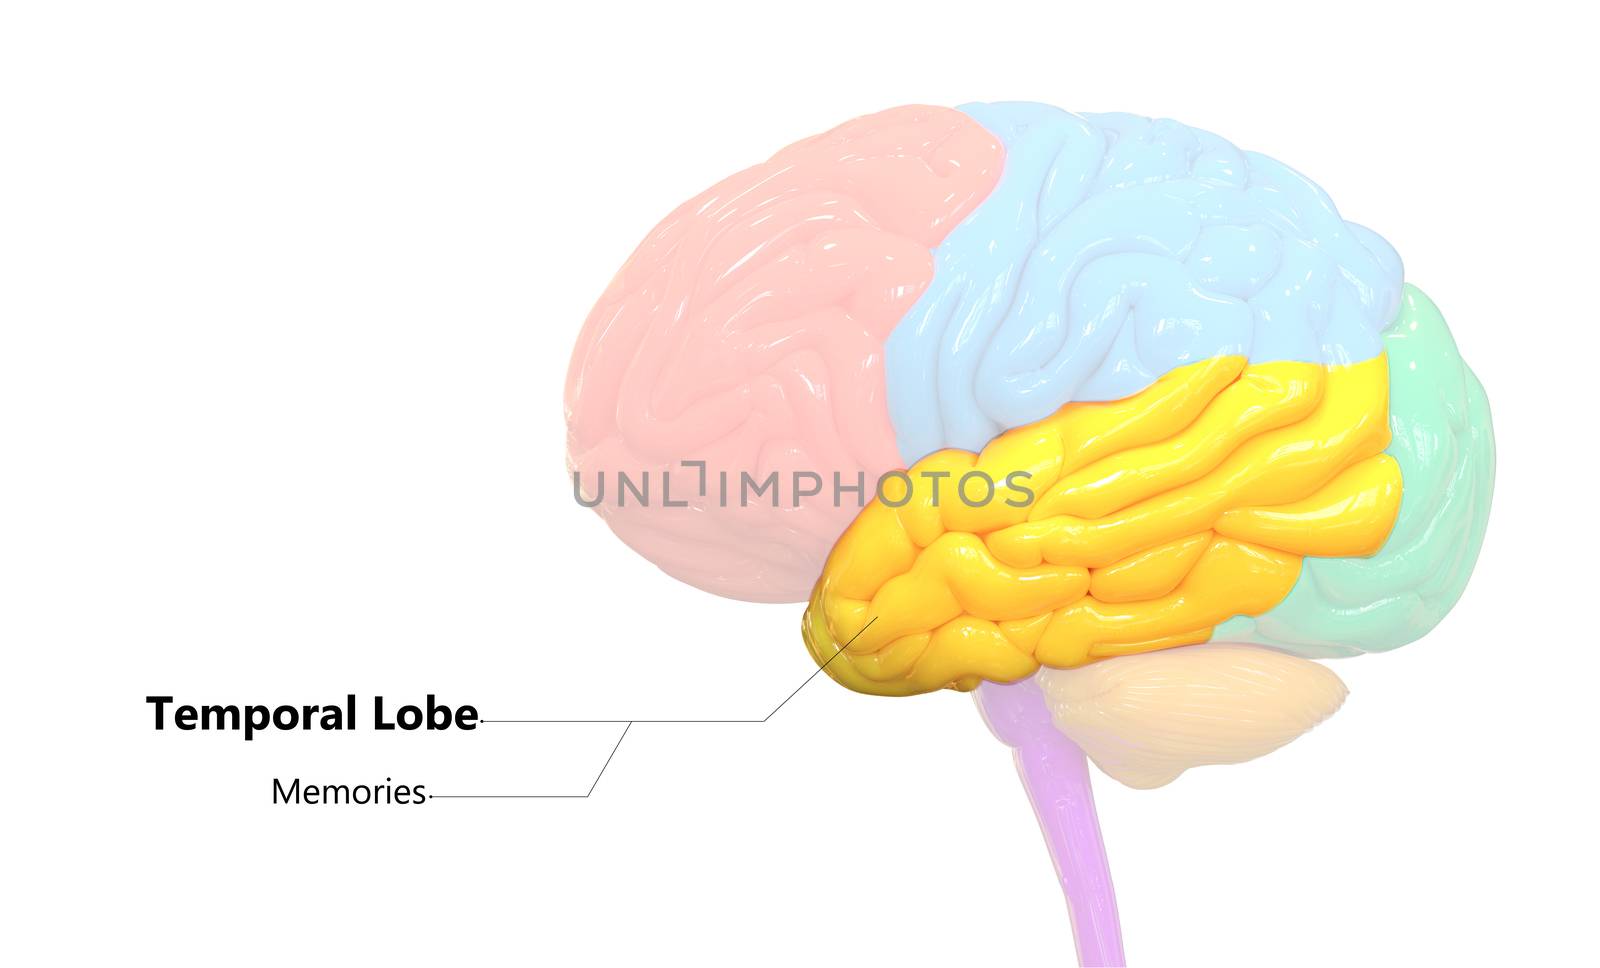 3D Illustration Concept of Central Organ of Human Nervous System Brain Lobes Temporal Lobe Described with Labels Anatomy